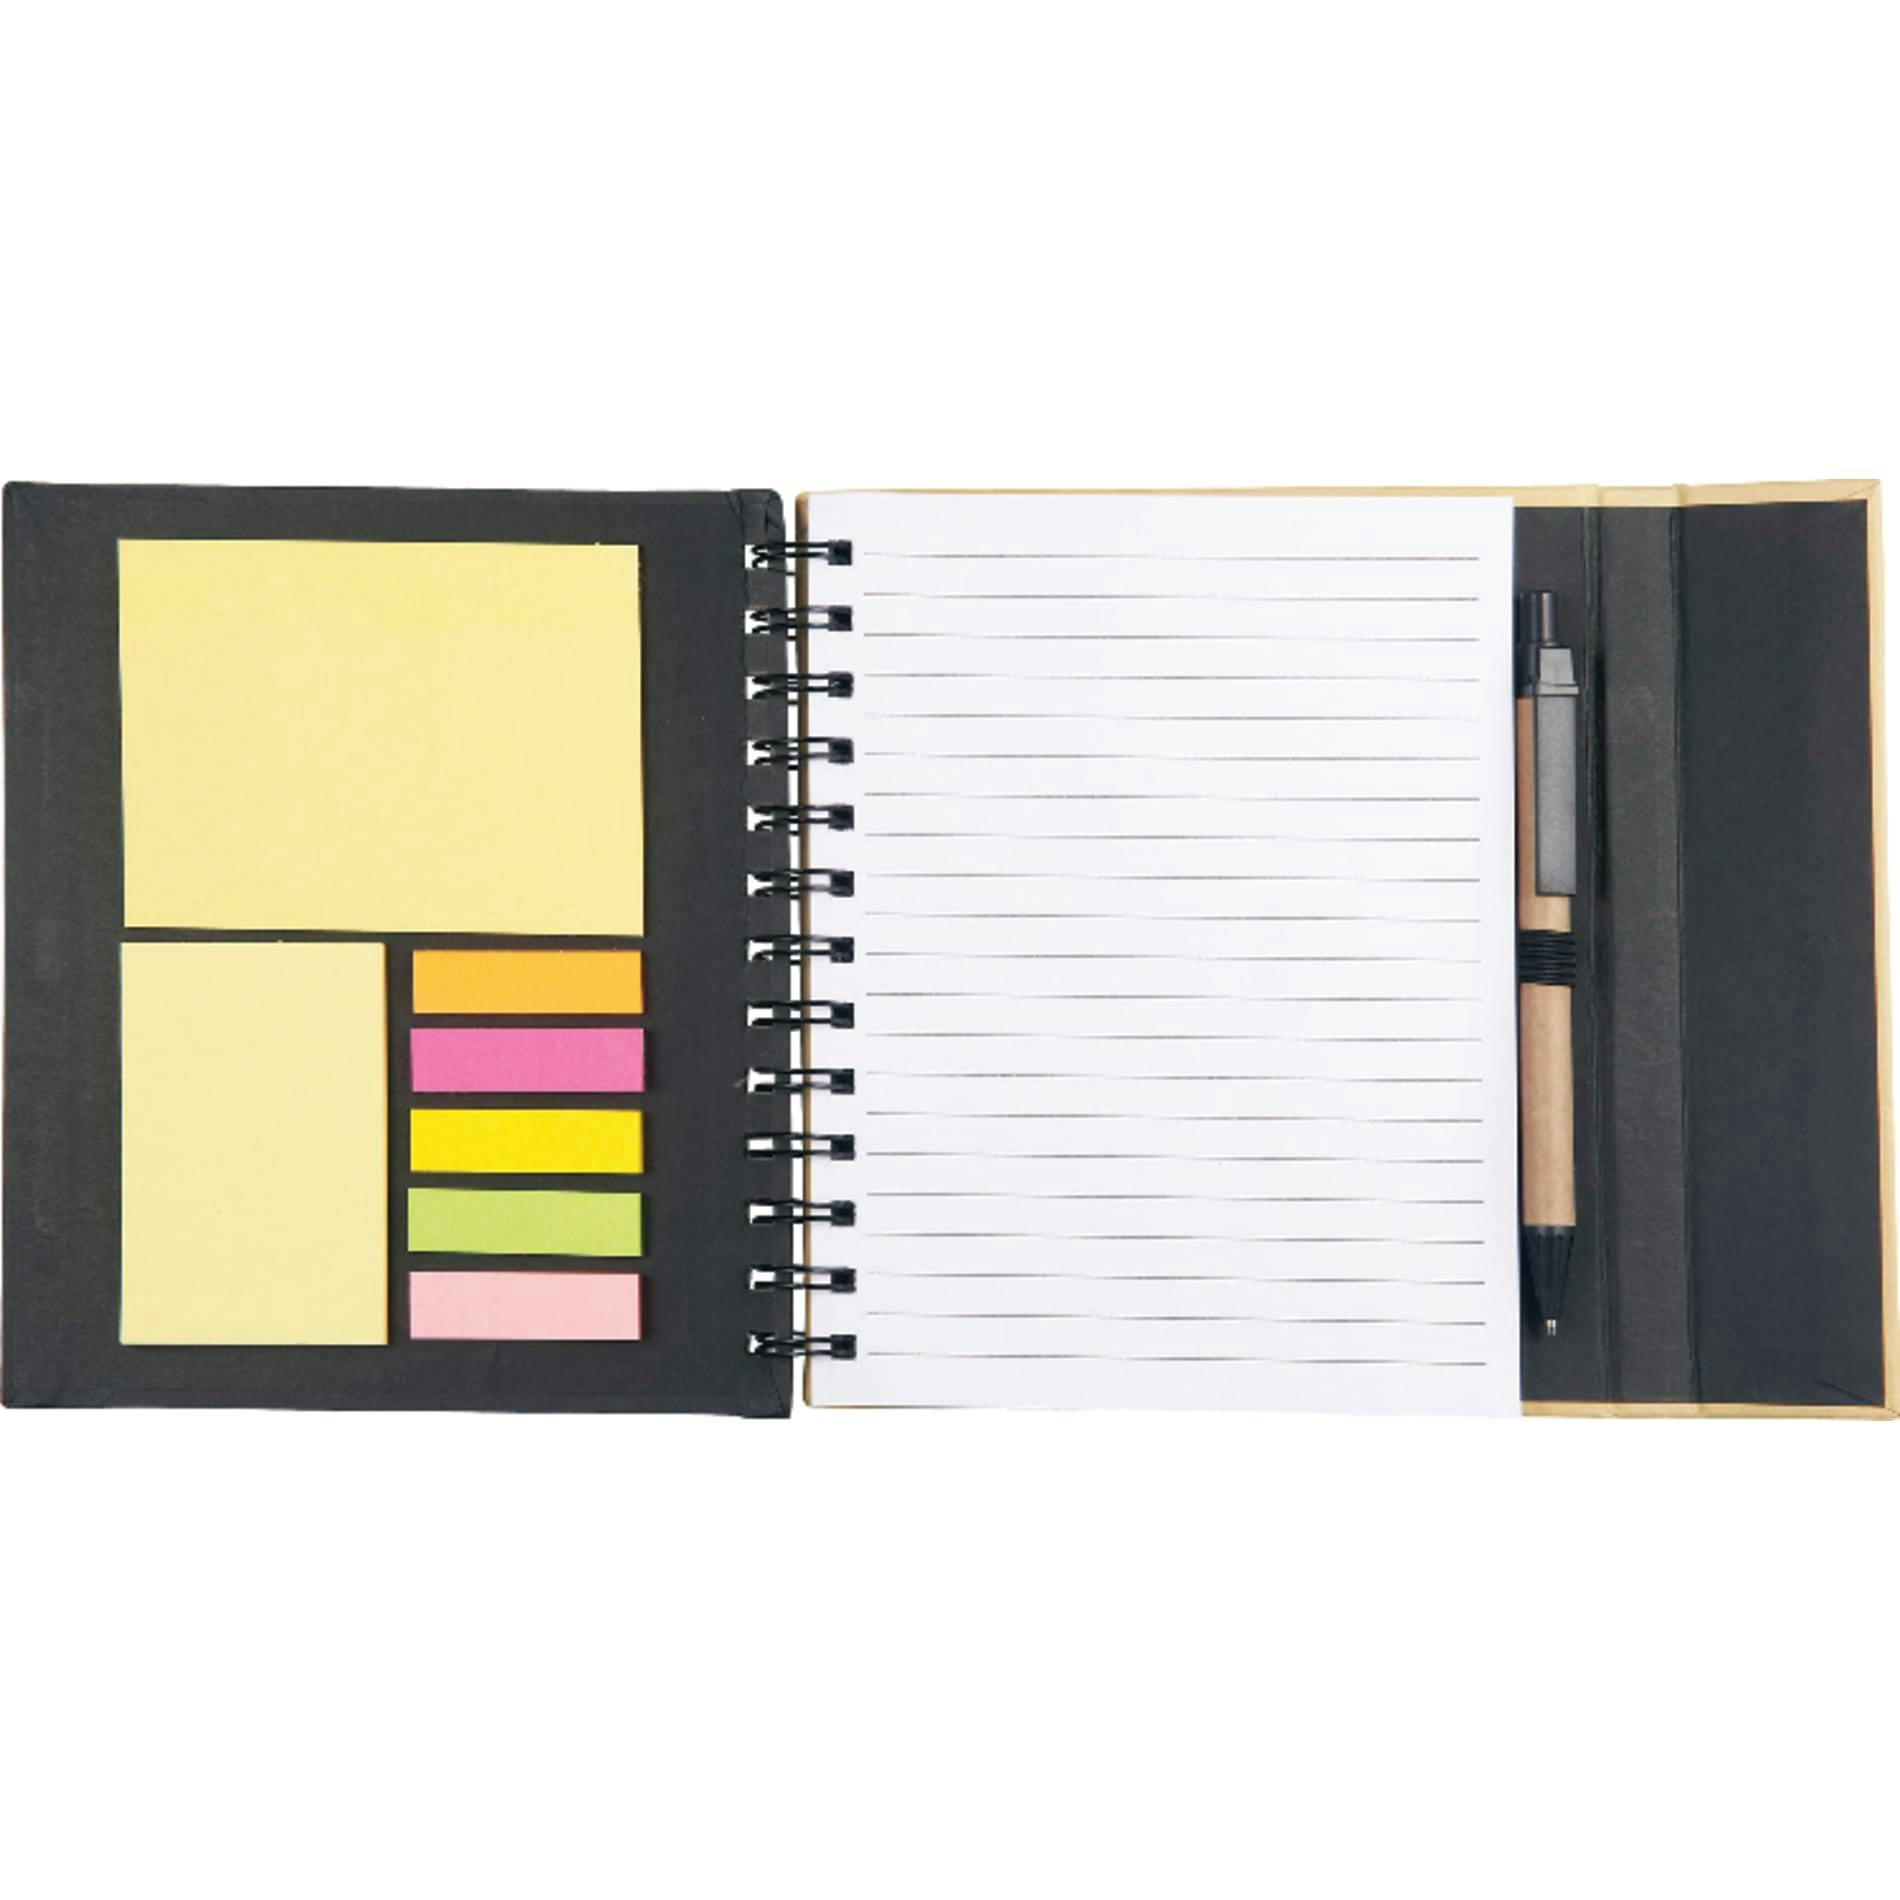 6.5" x 7" Lock-it Spiral Notebook w/Pen - additional Image 2